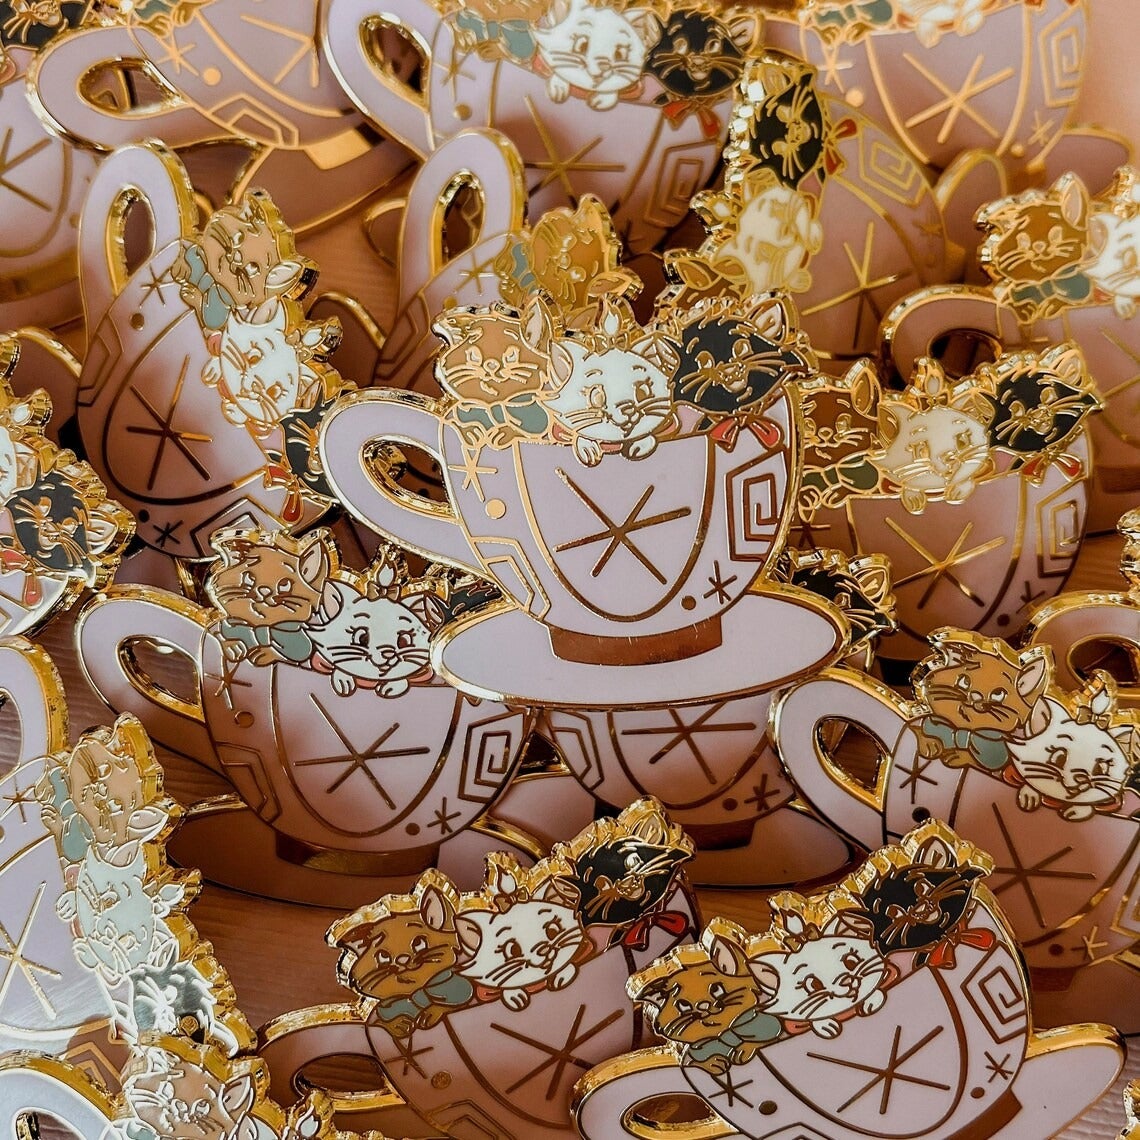 an enamel pin of the three aristocat kittens in a teacup